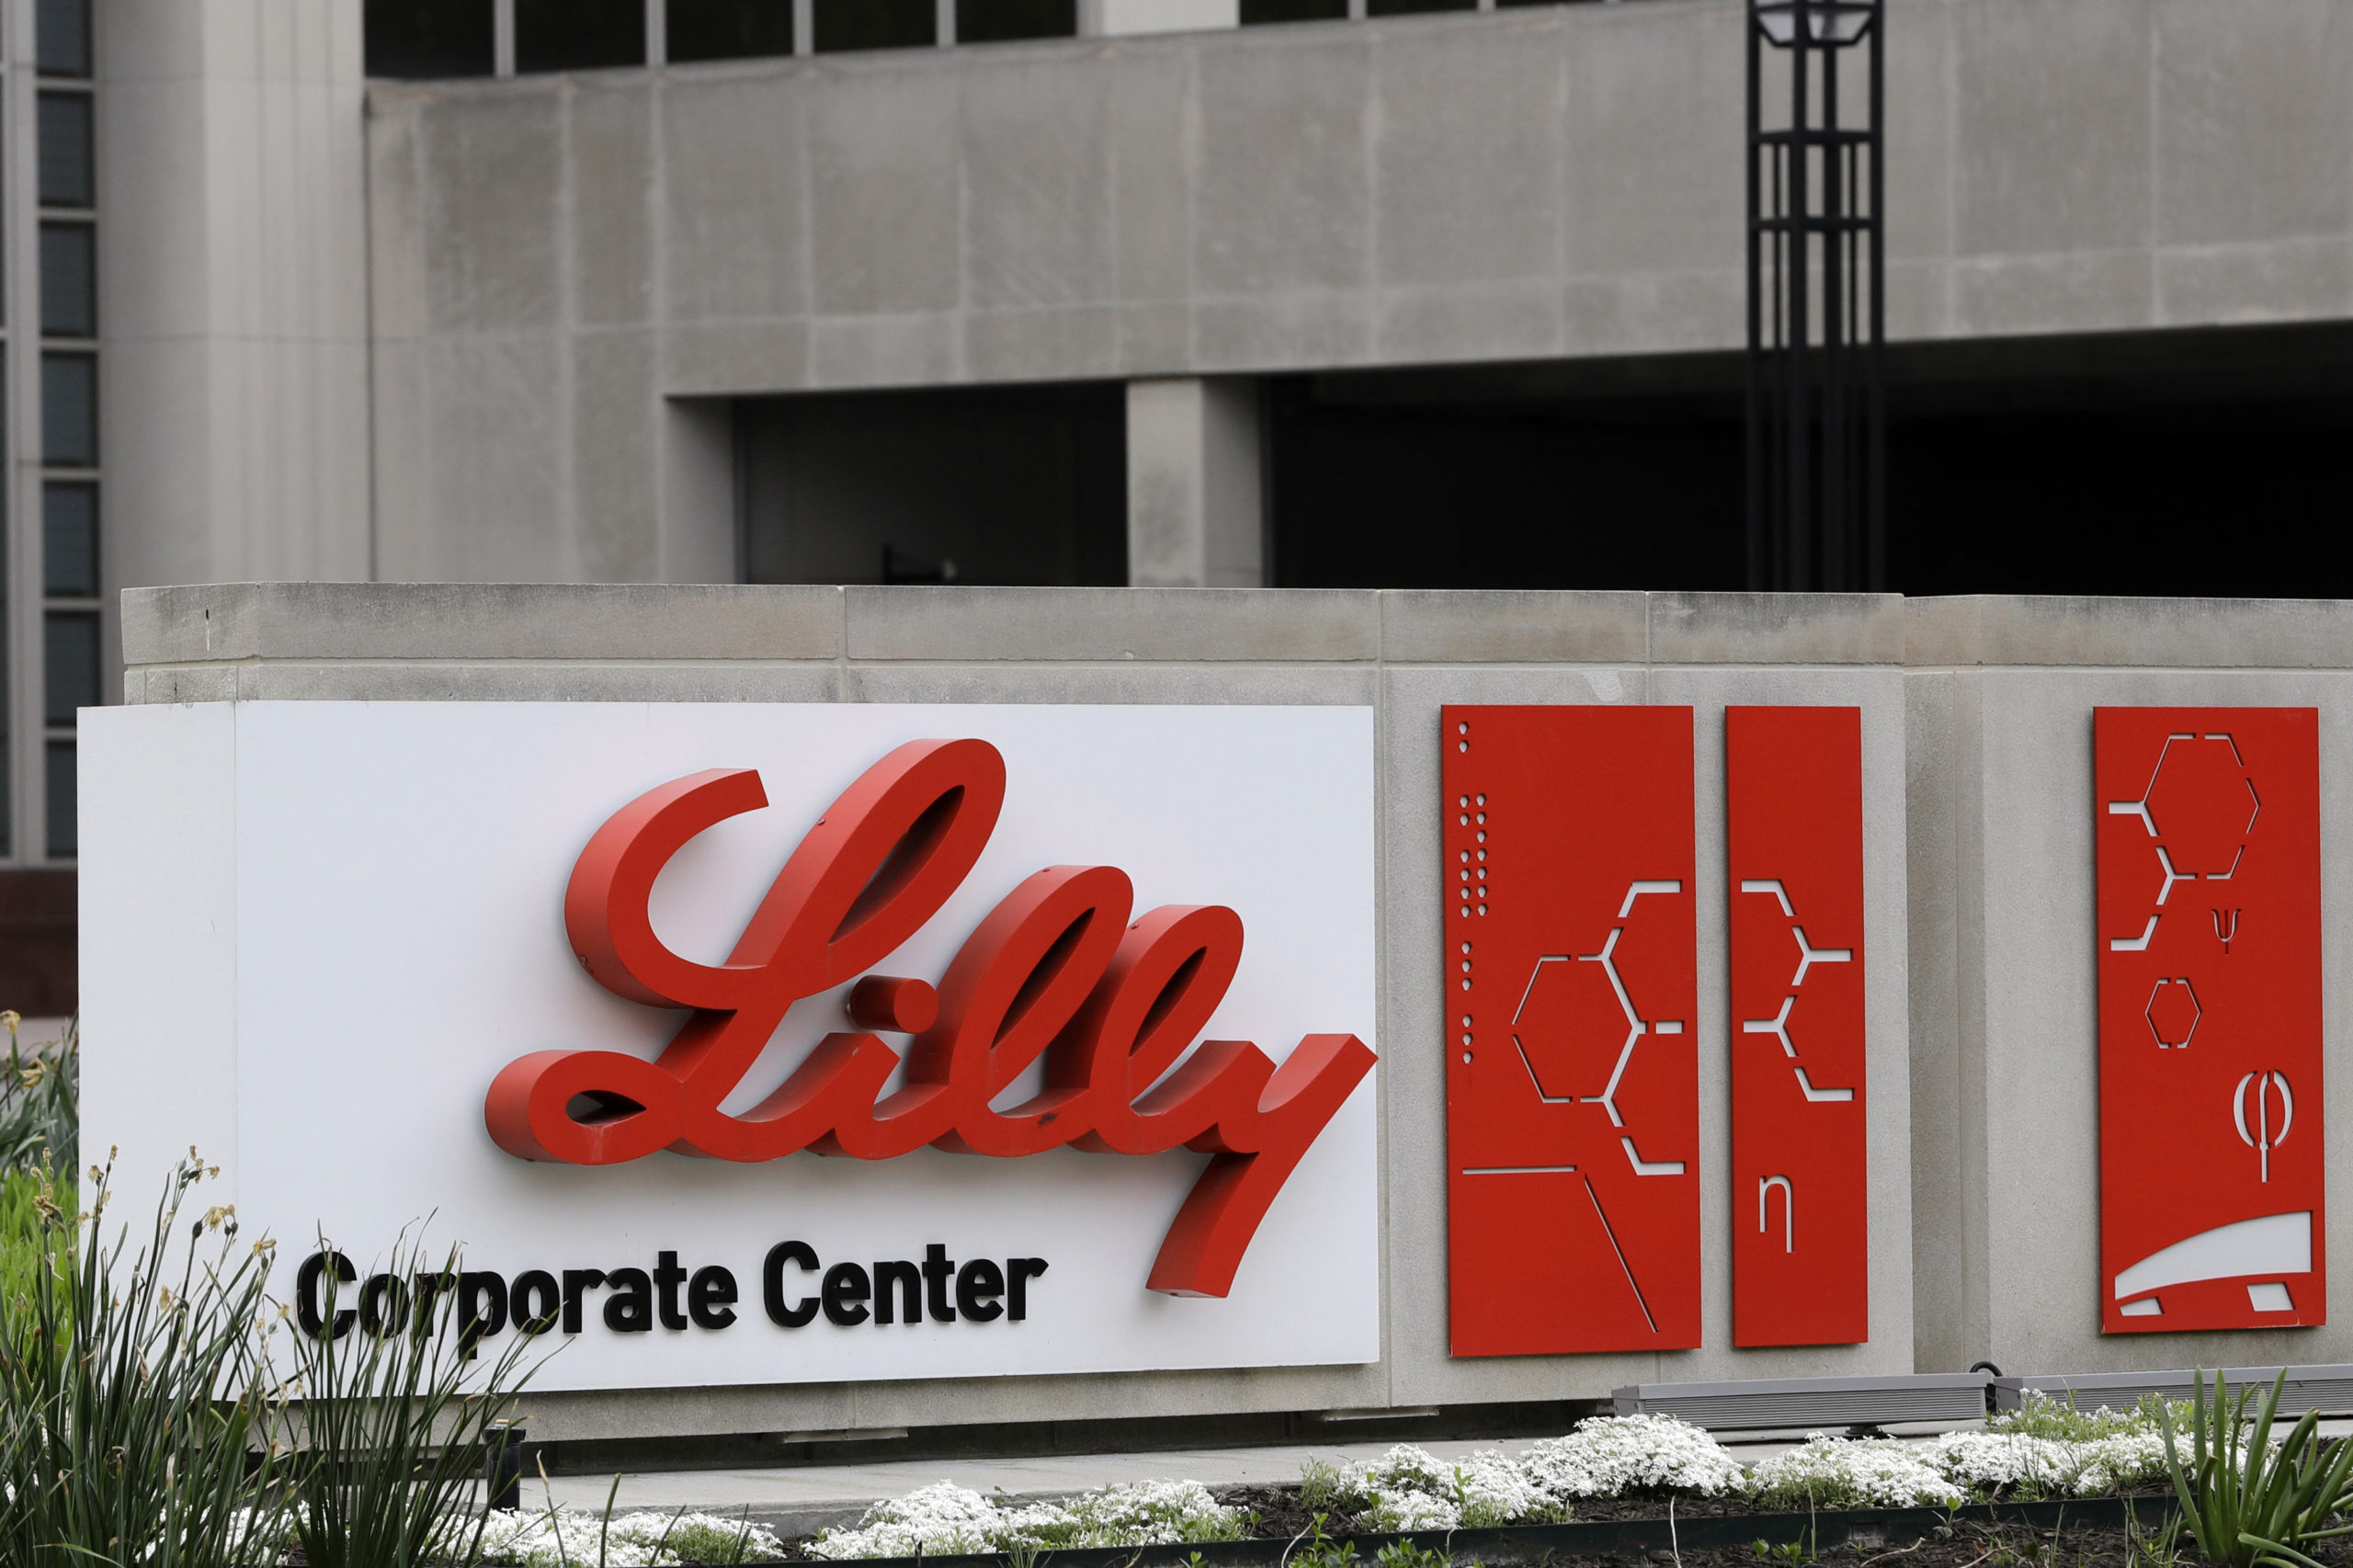 FILE - This April 26, 2017, file photo shows the Eli Lilly & Co. corporate headquarters in Indi...